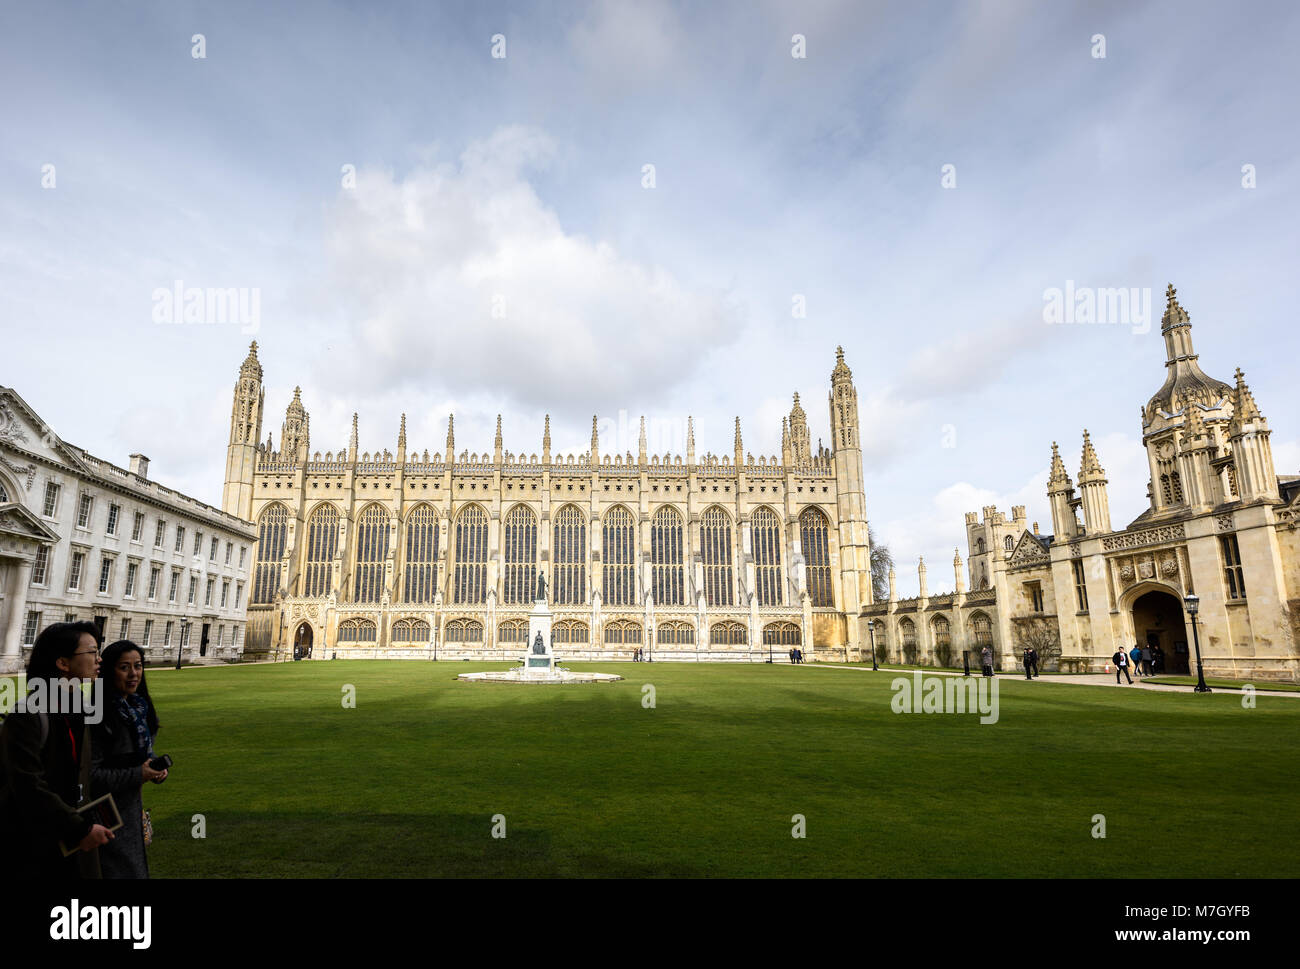 Two female students walk along a path next to the Front Court lawn at King's college, university of Cambridge, England, with the chapel in the centre, Stock Photo